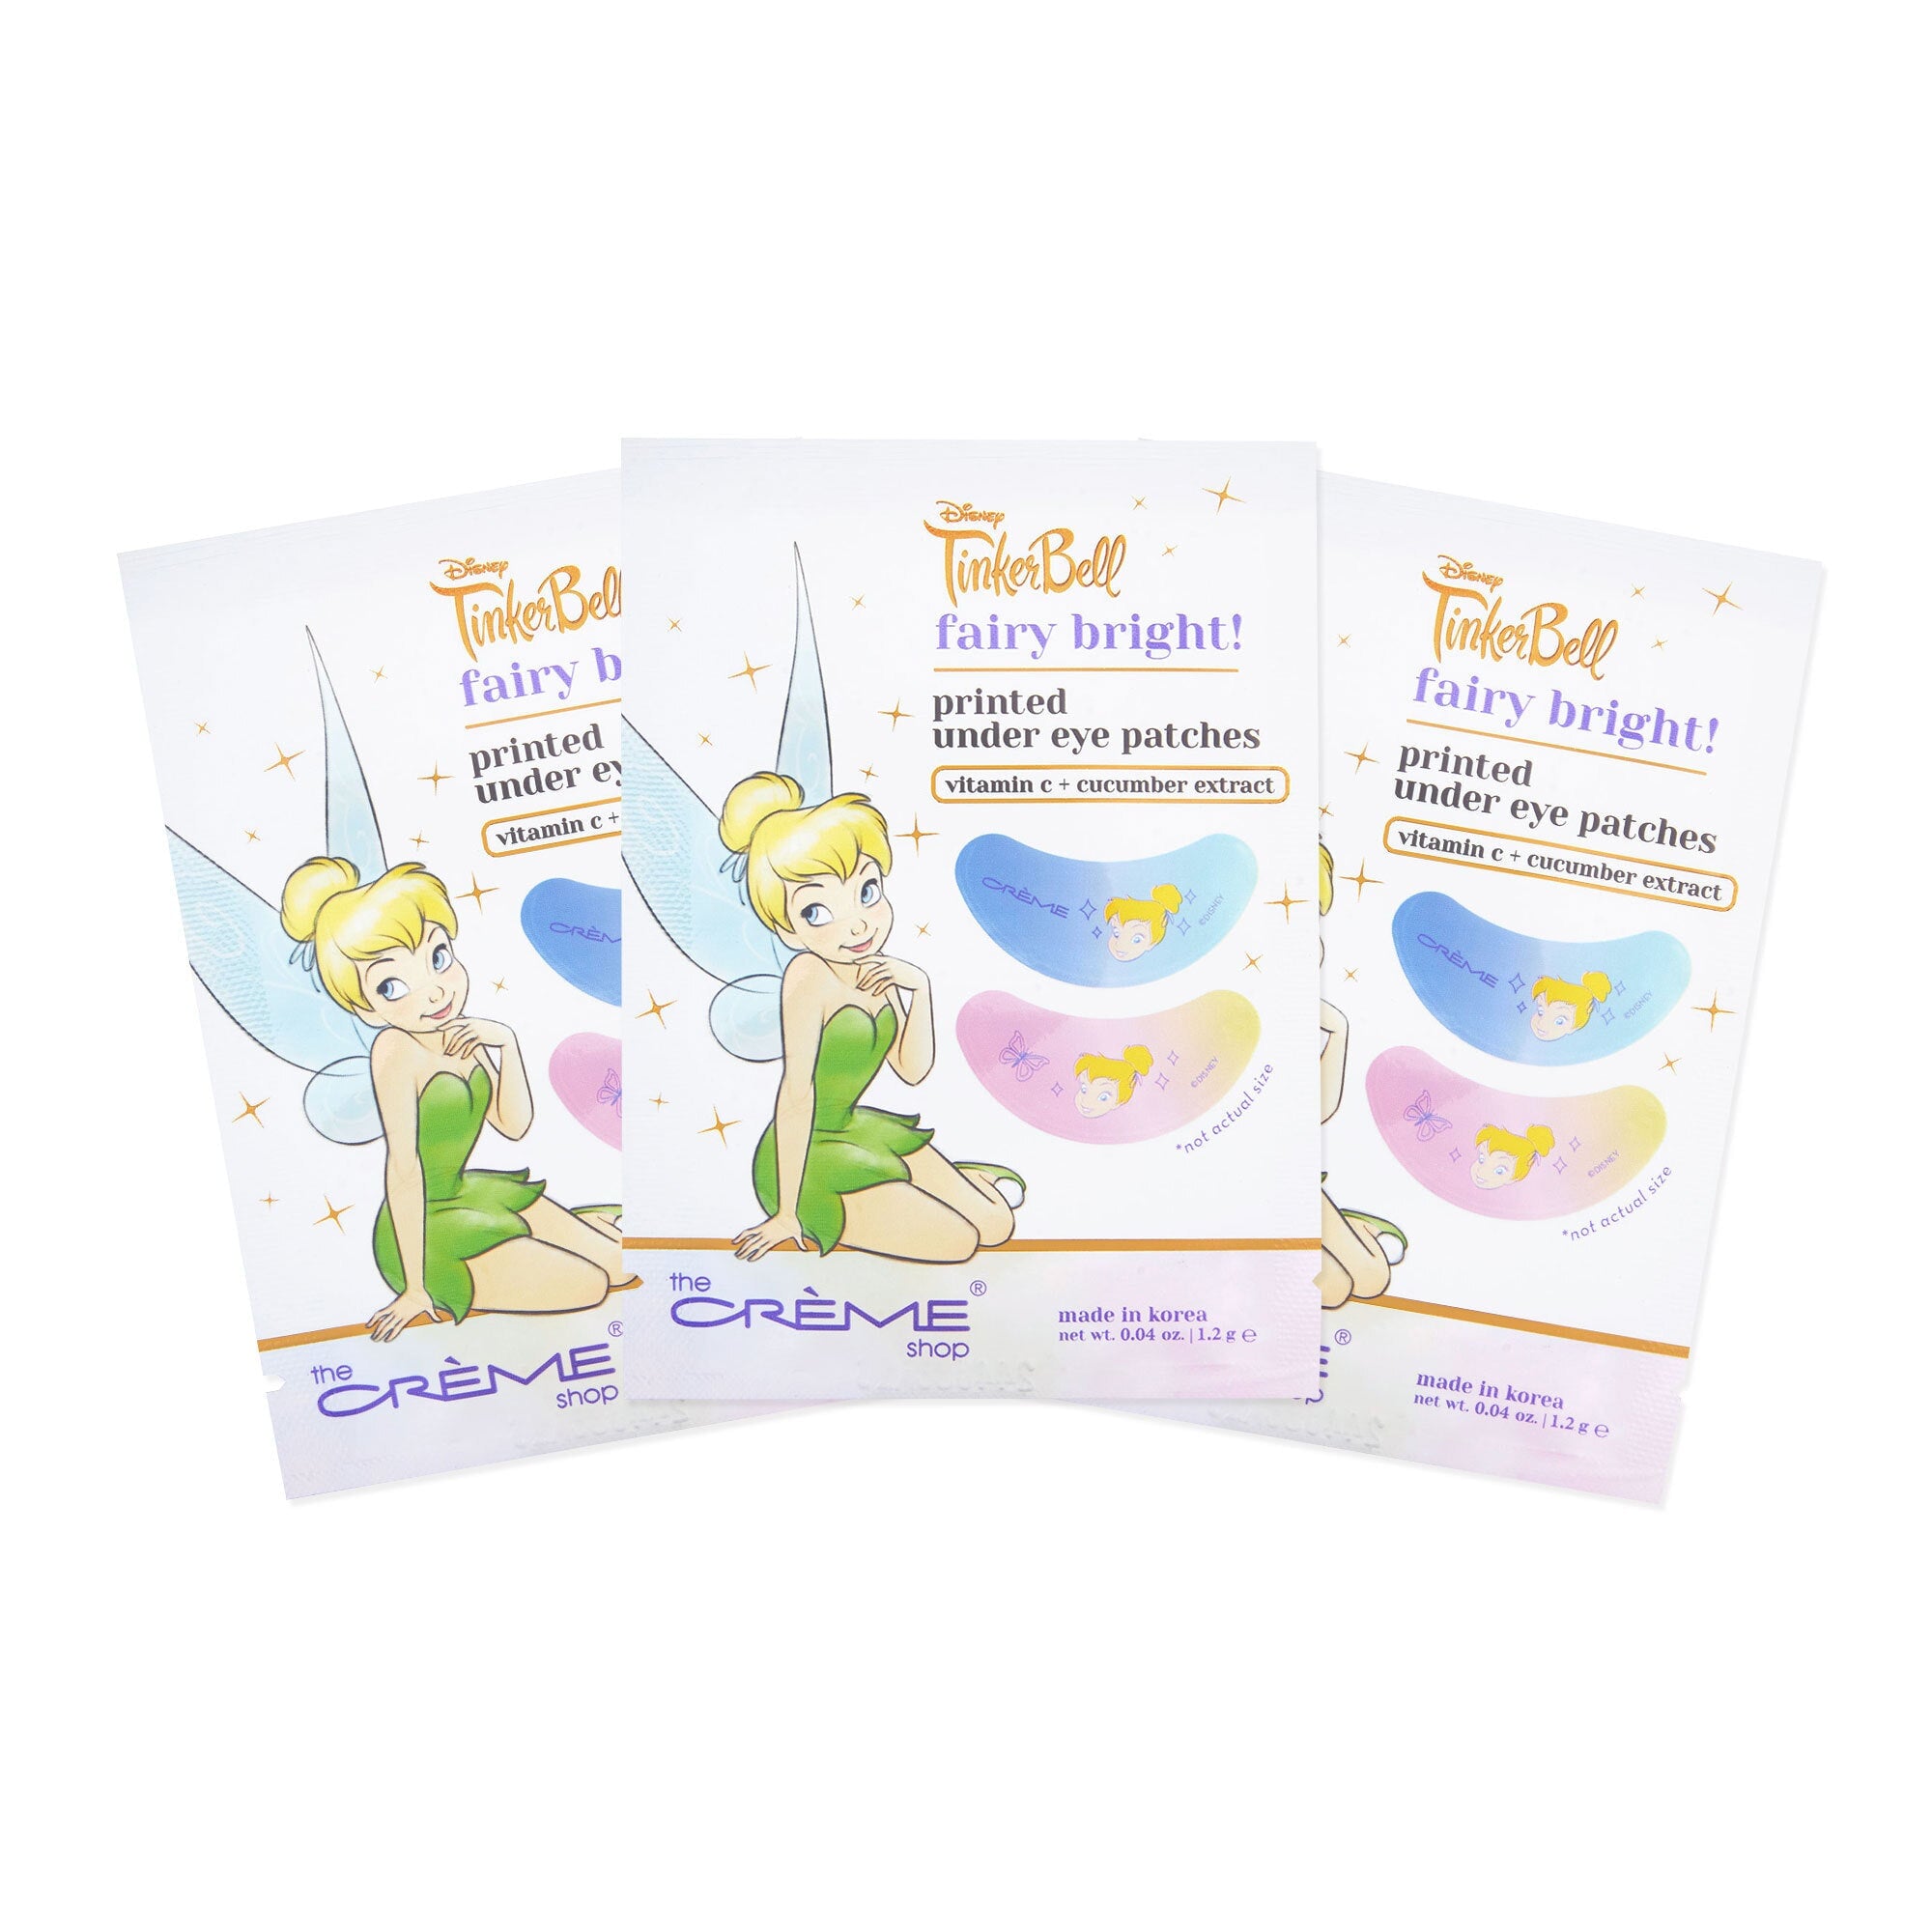 Tinker Bell Fairy Bright! Printed Under Eye Patches (3 Pairs) Under Eye Patches The Crème Shop x Disney 